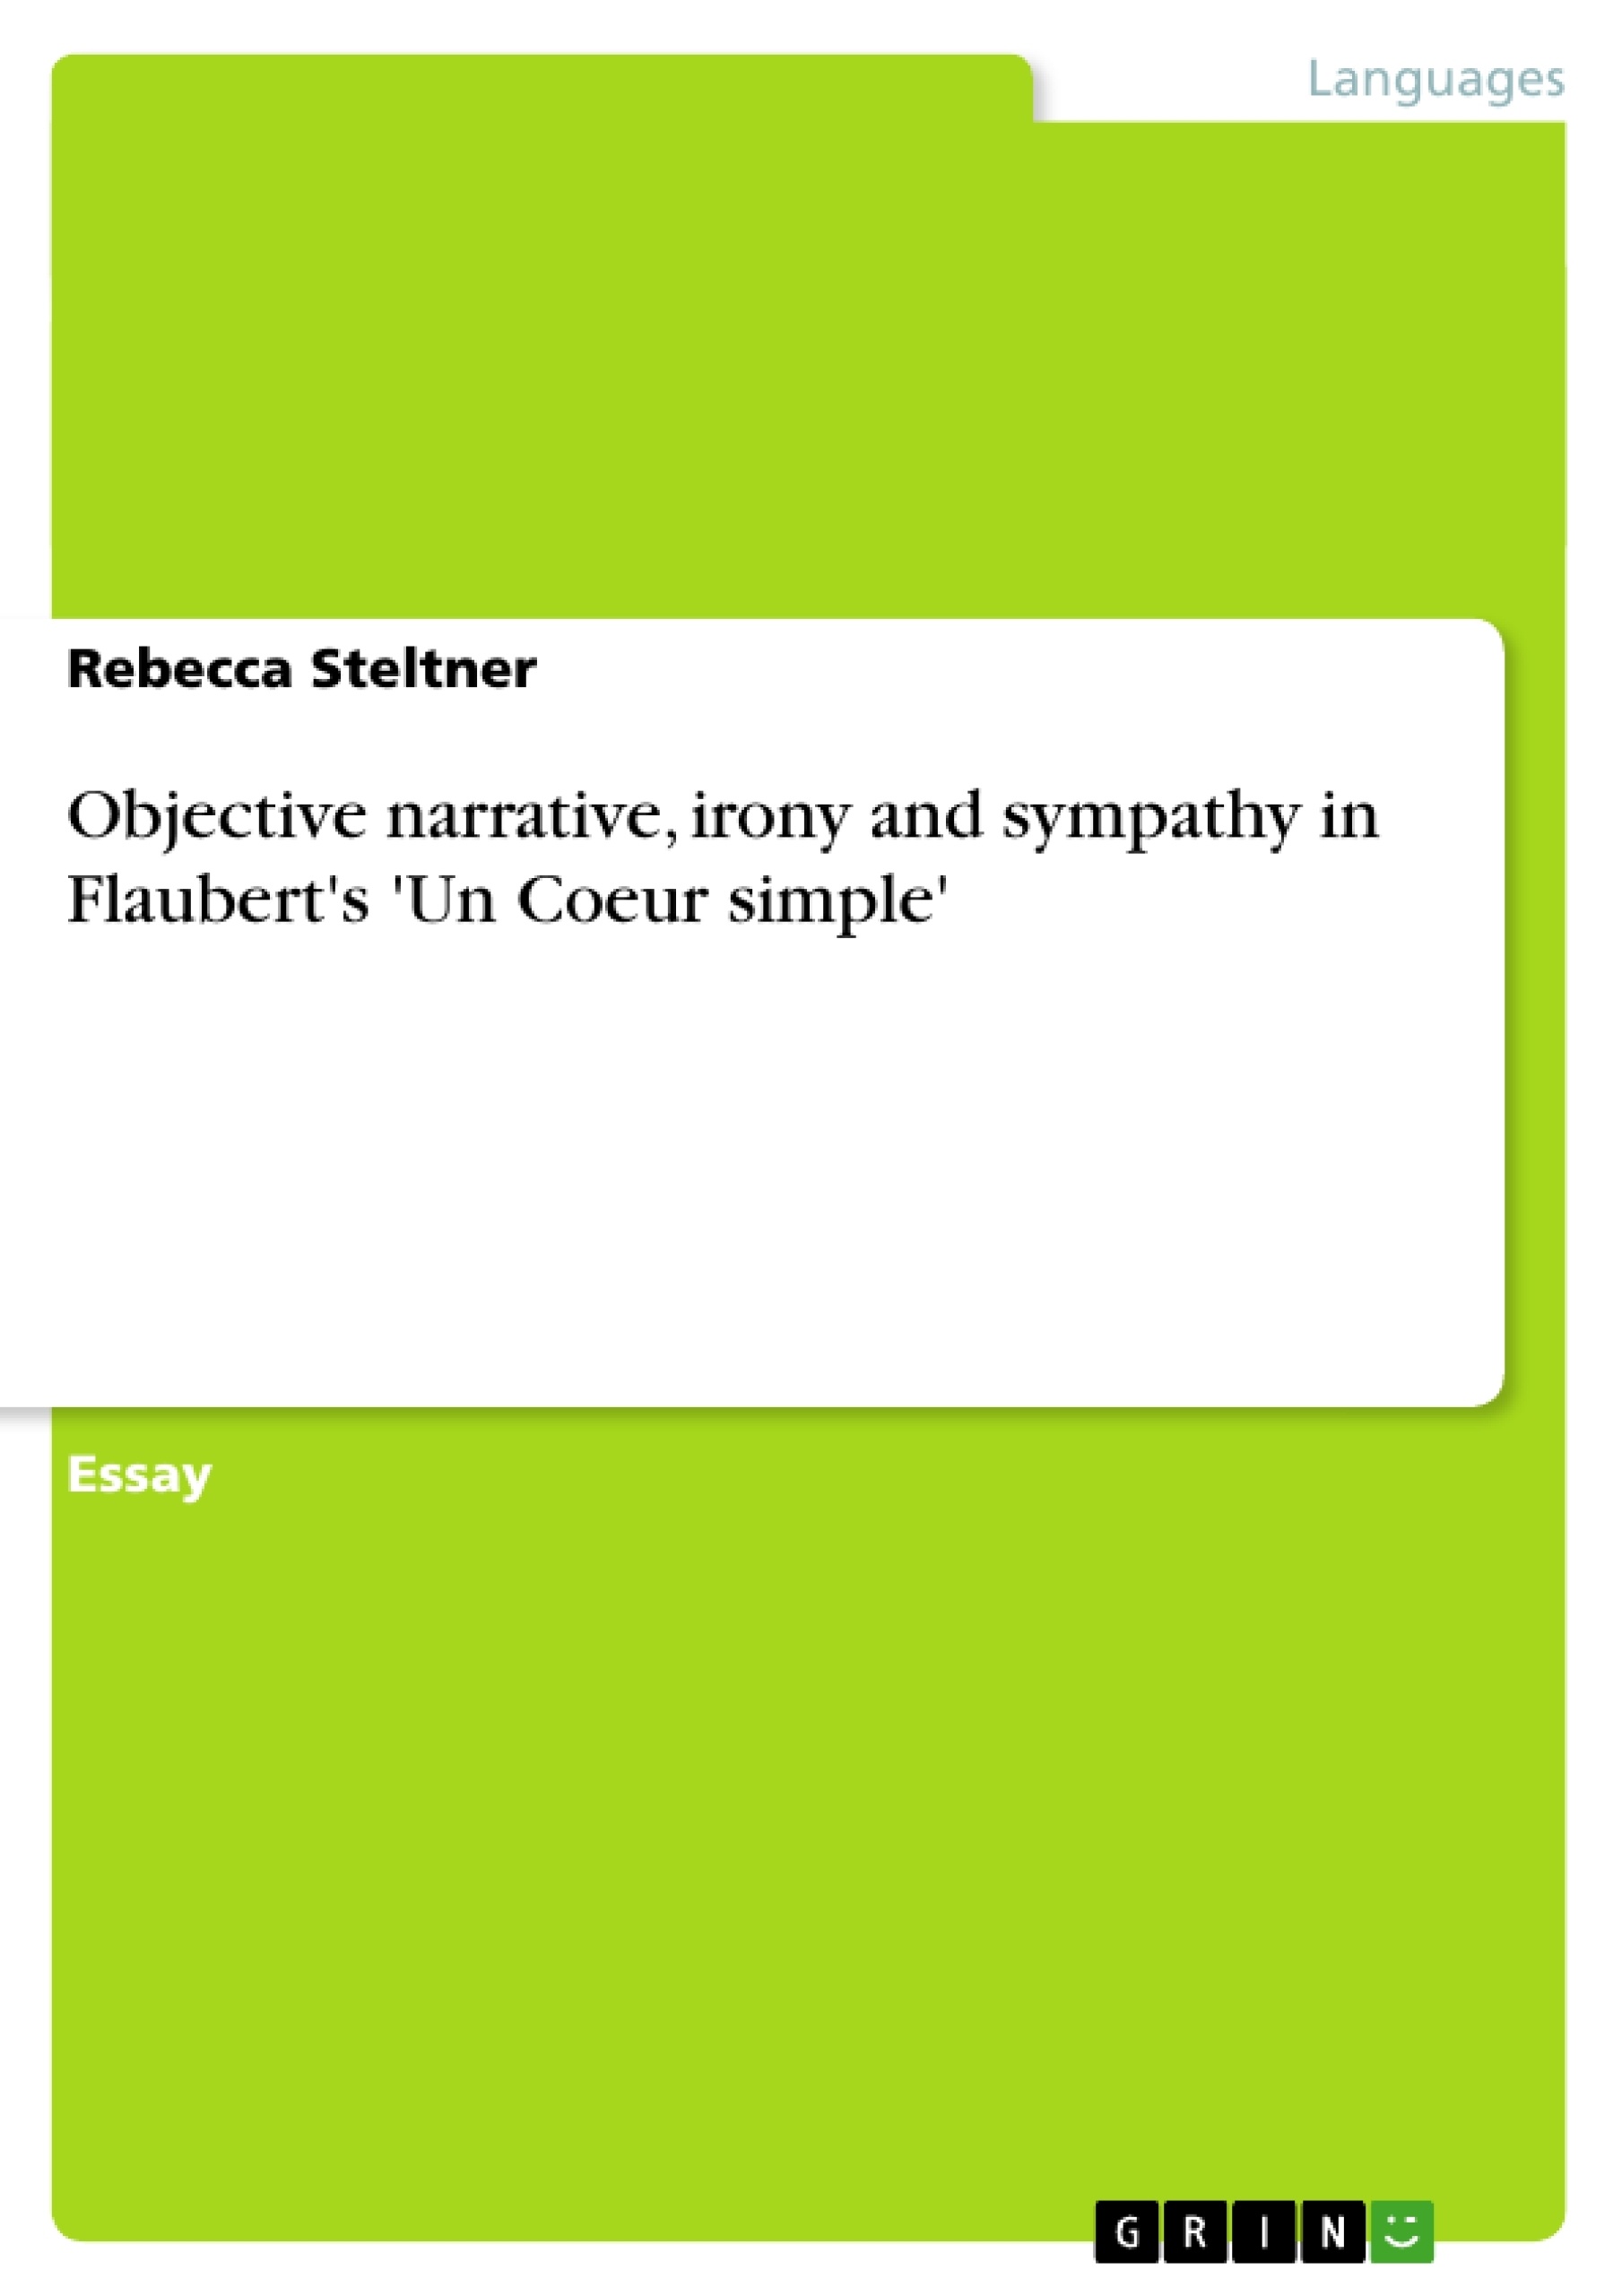 Título: Objective narrative, irony and sympathy in Flaubert's 'Un Coeur simple'